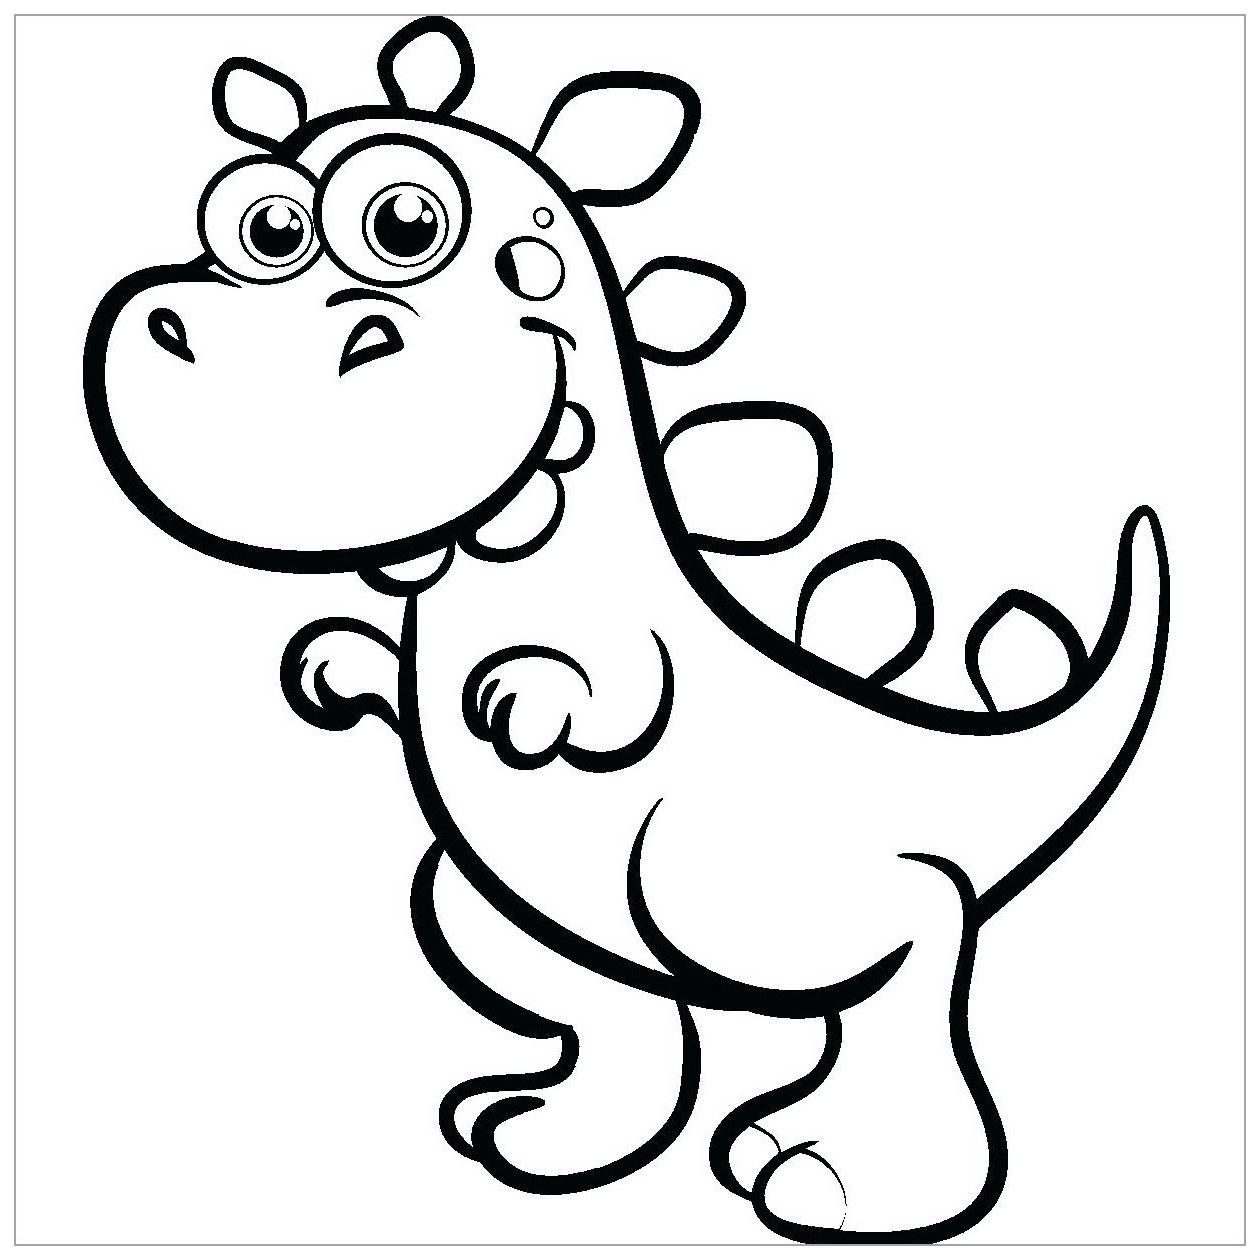 dinosaurs-to-download-t-rex-cartoon-dinosaurs-kids-coloring-pages